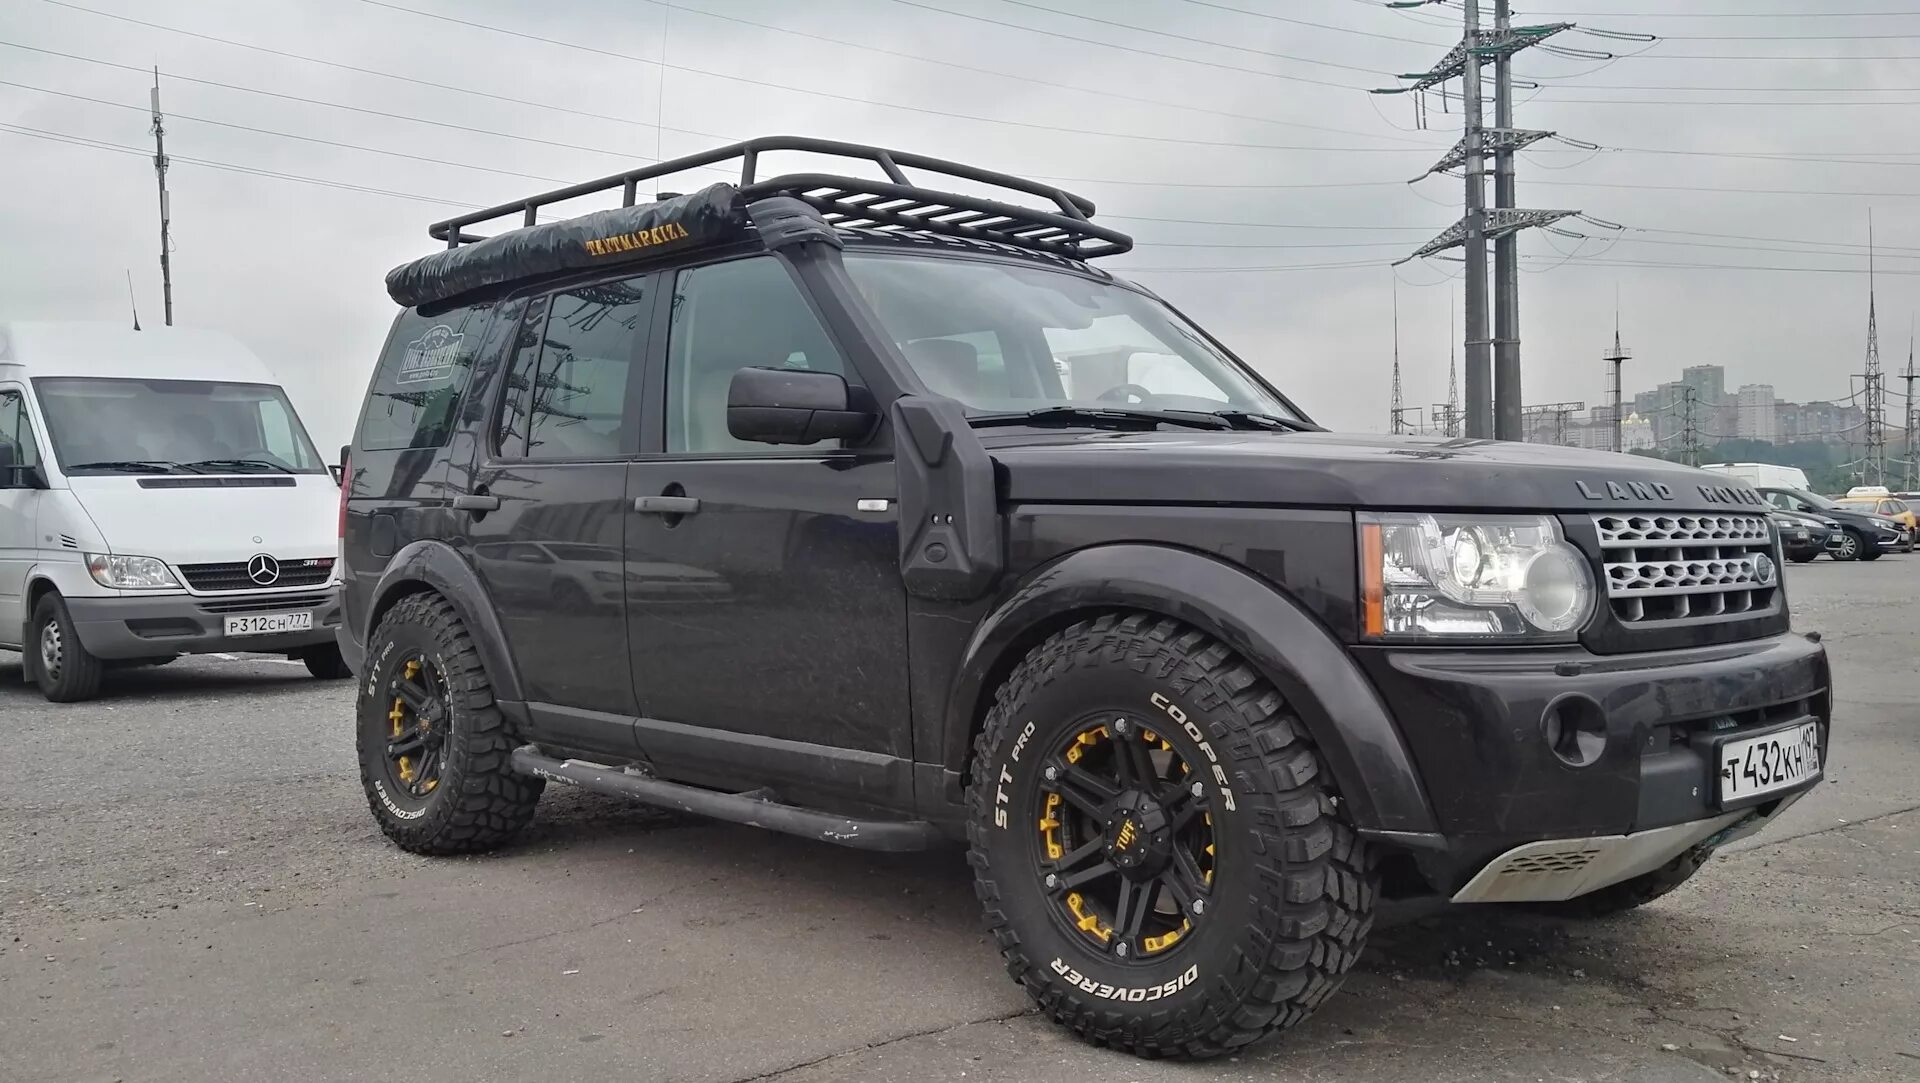 Land Rover Discovery 3 Offroad. Land Rover Discovery 4 off Road Tuning. Ленд Ровер Дискавери 4 офф роуд. Land Rover Discovery 2 35 колеса. Ленд дискавери колеса